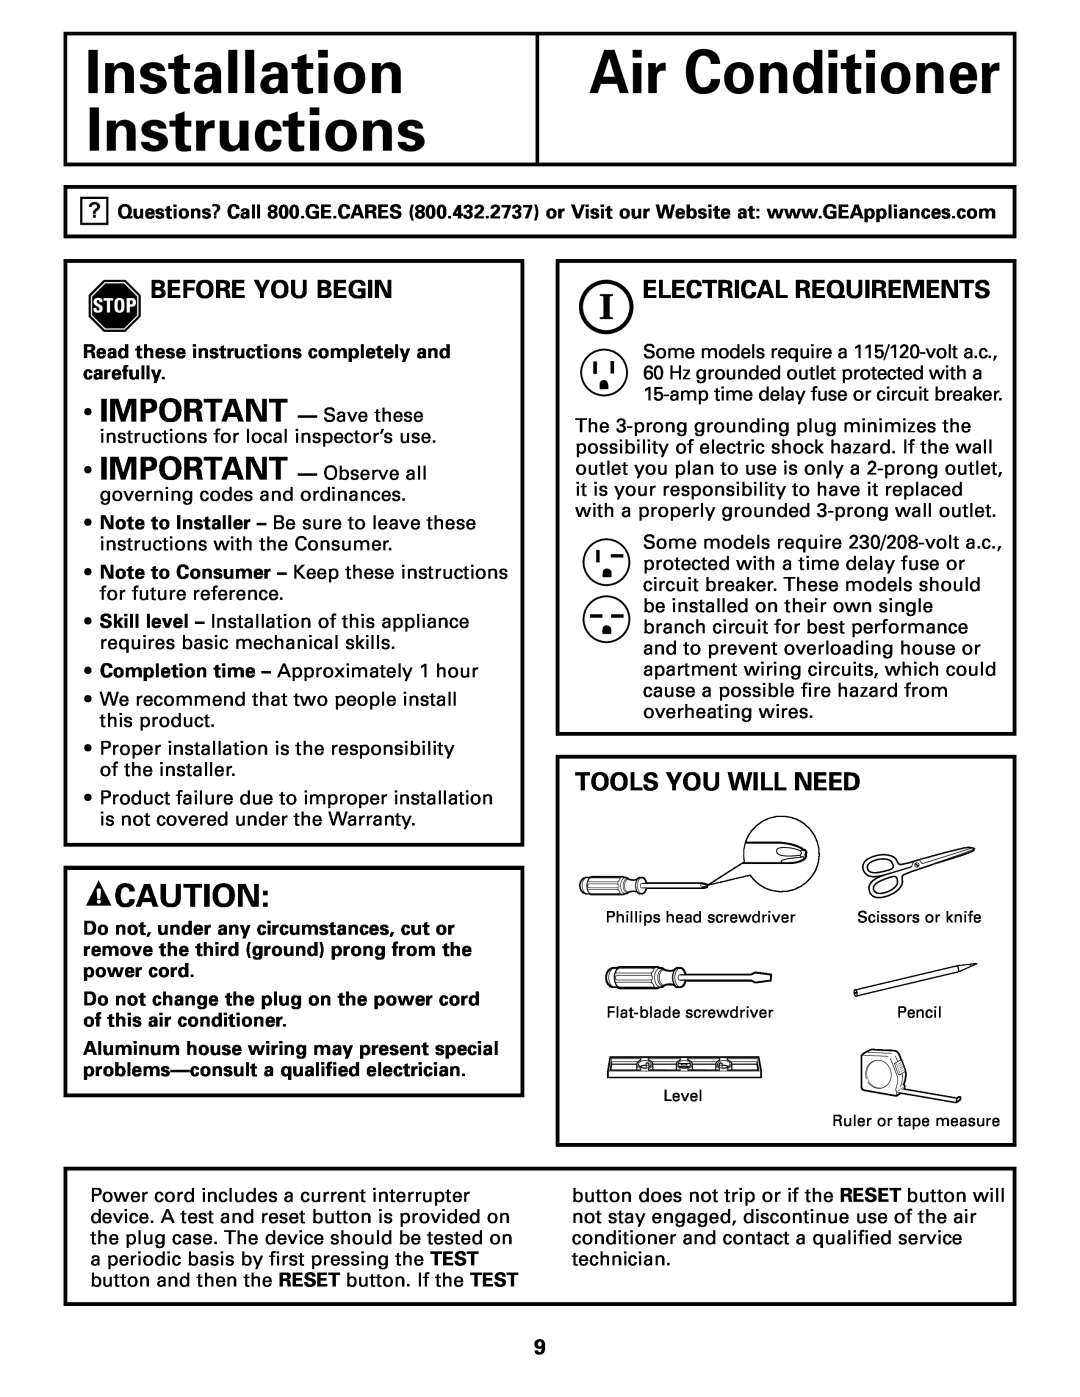 GE AGH06 Installation Instructions, Air Conditioner, •IMPORTANT — Save these, Before You Begin, Electrical Requirements 